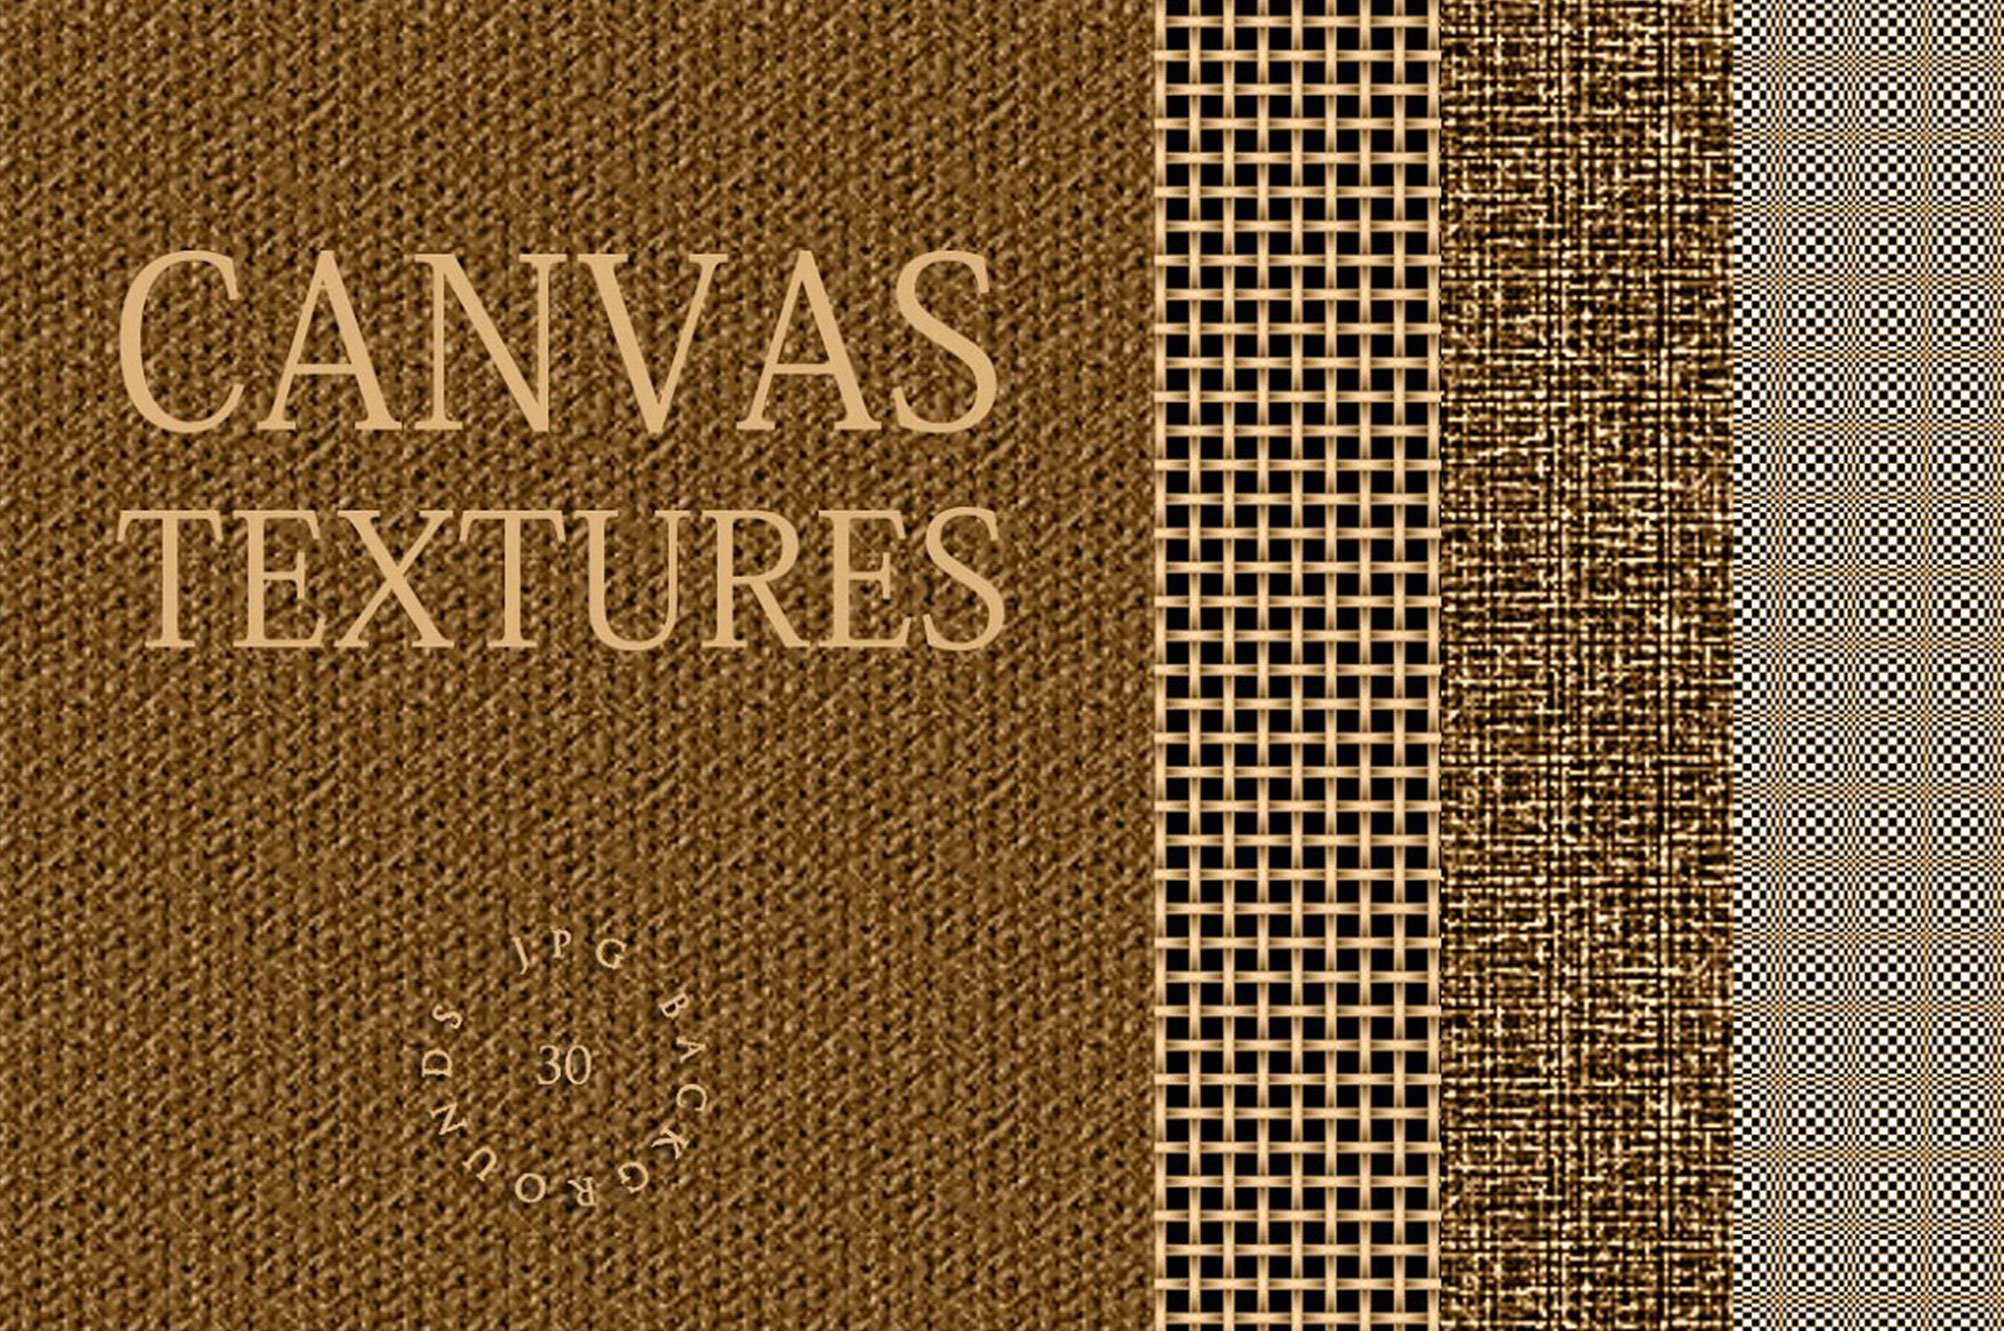 Canvas texture cover image.